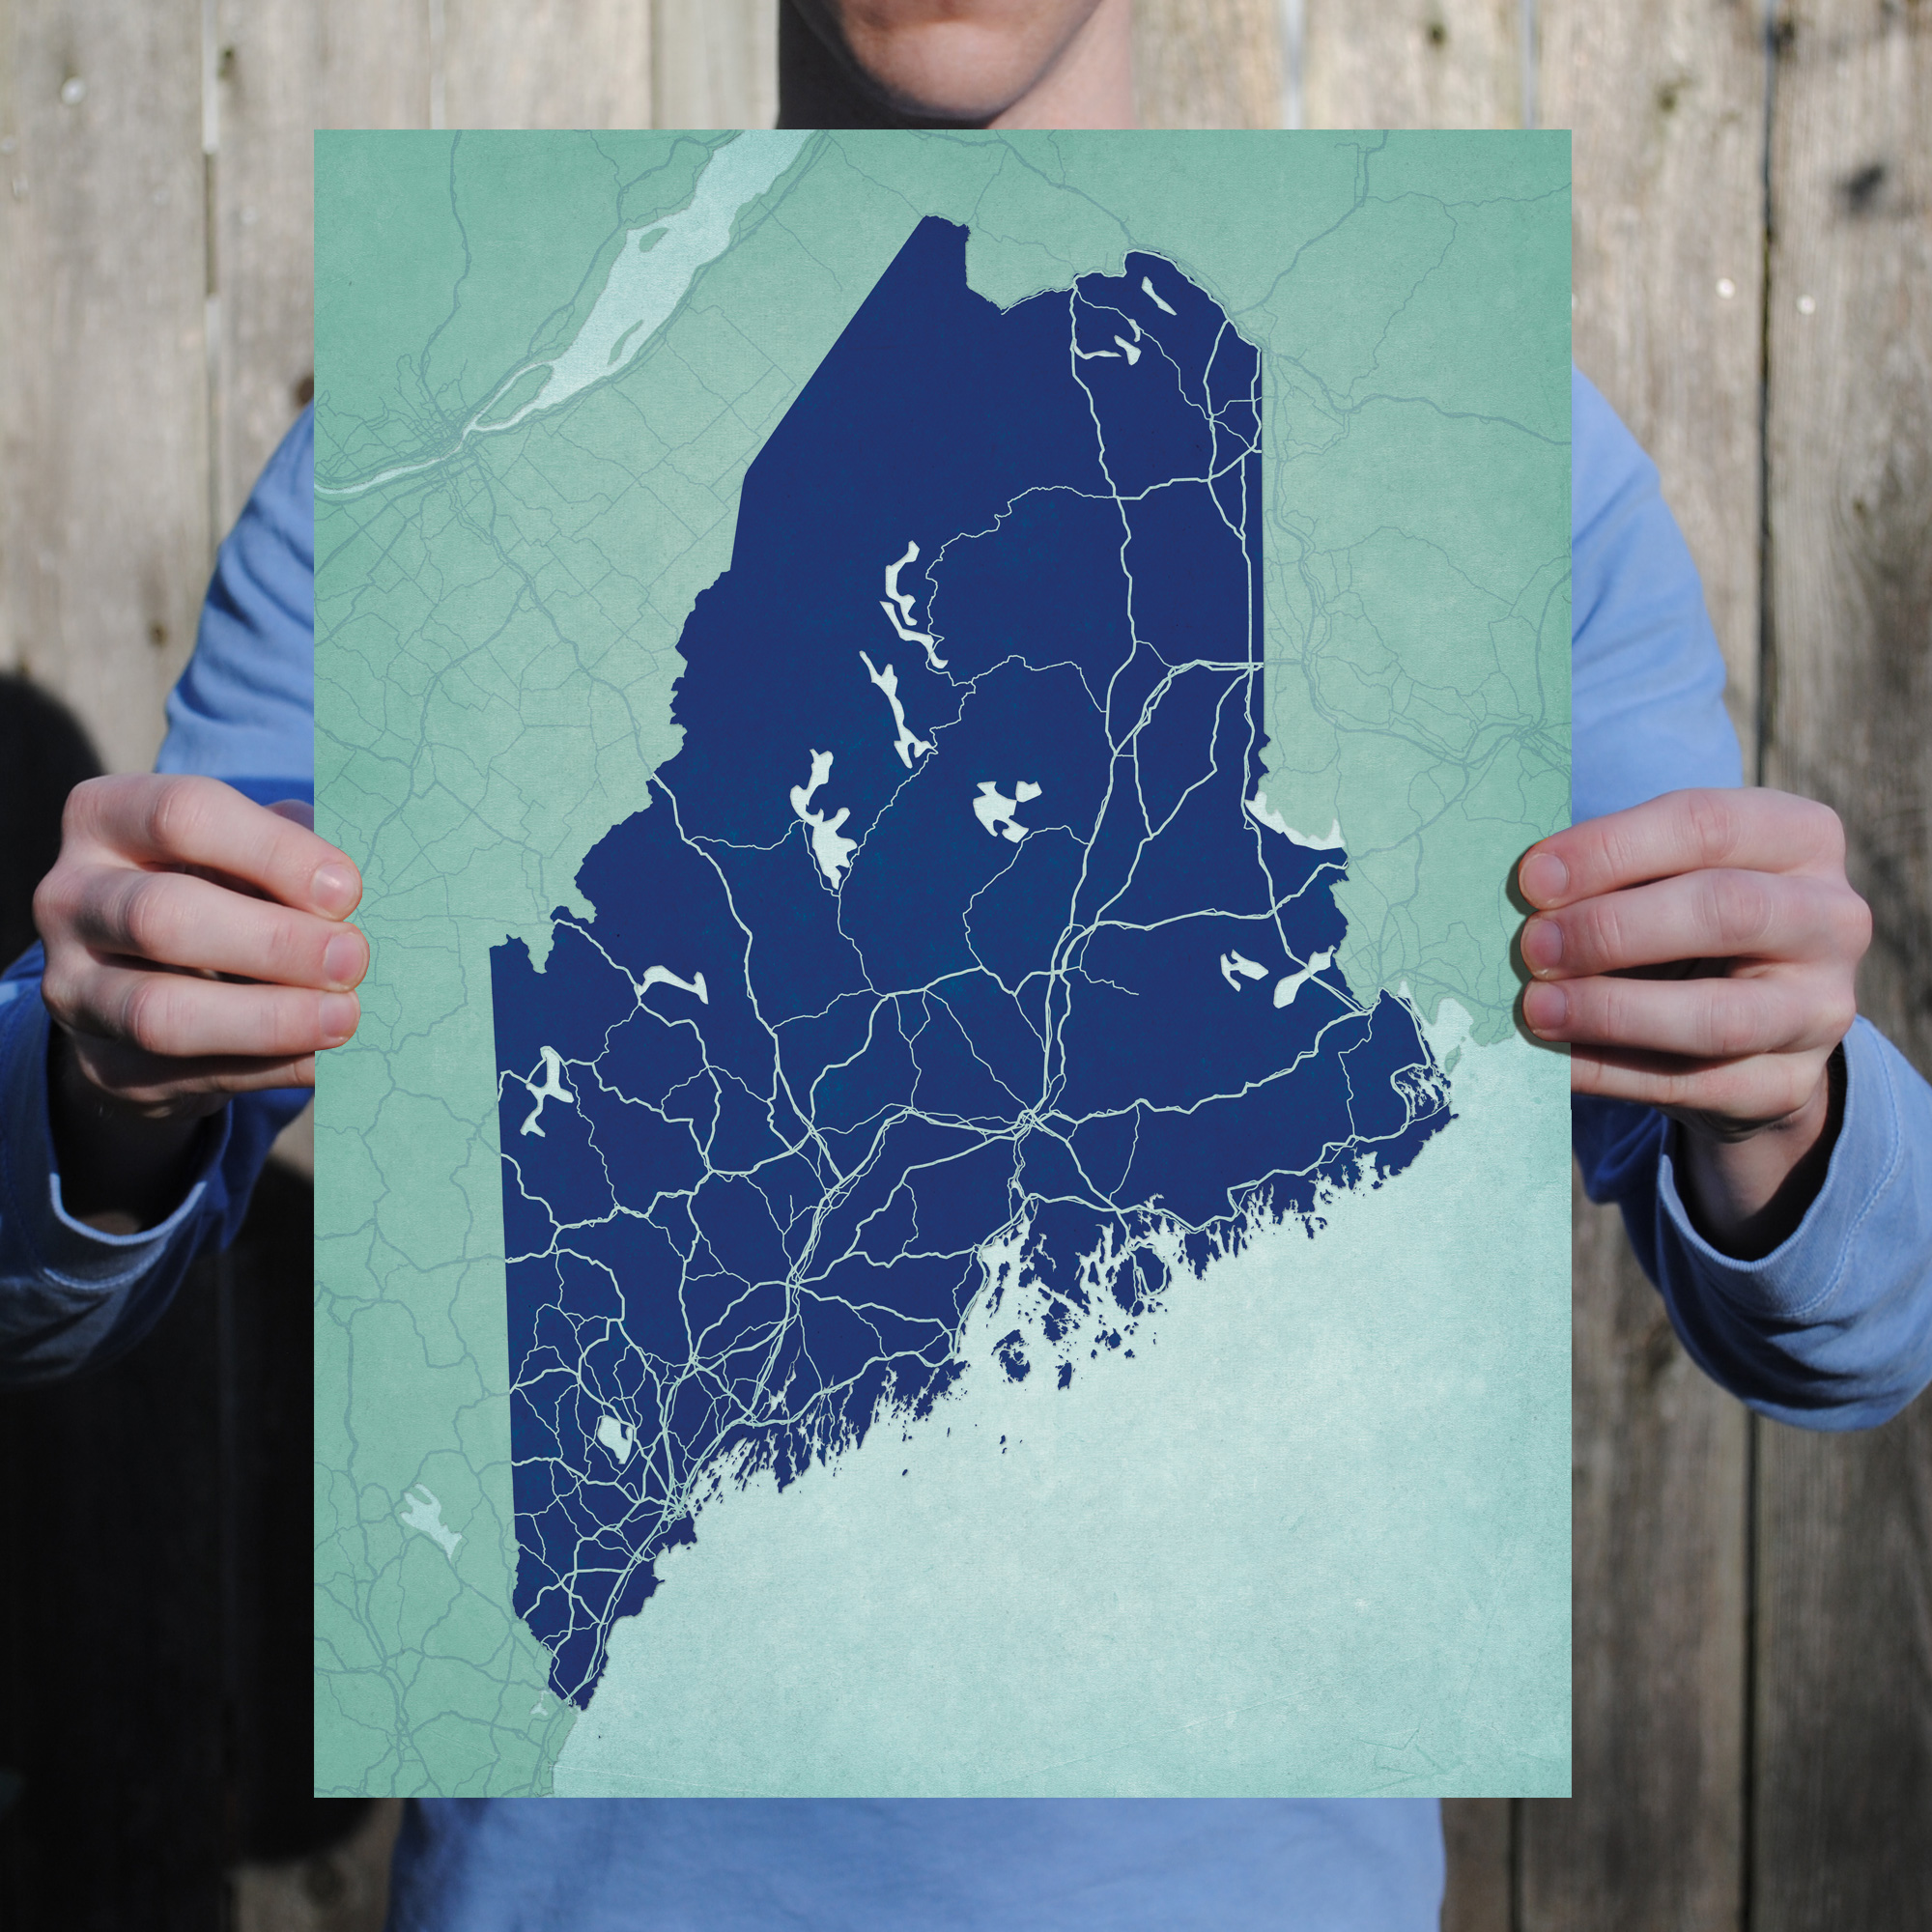 New Hampshire - Art Print or Canvas  State map art, Map art print, Art  prints